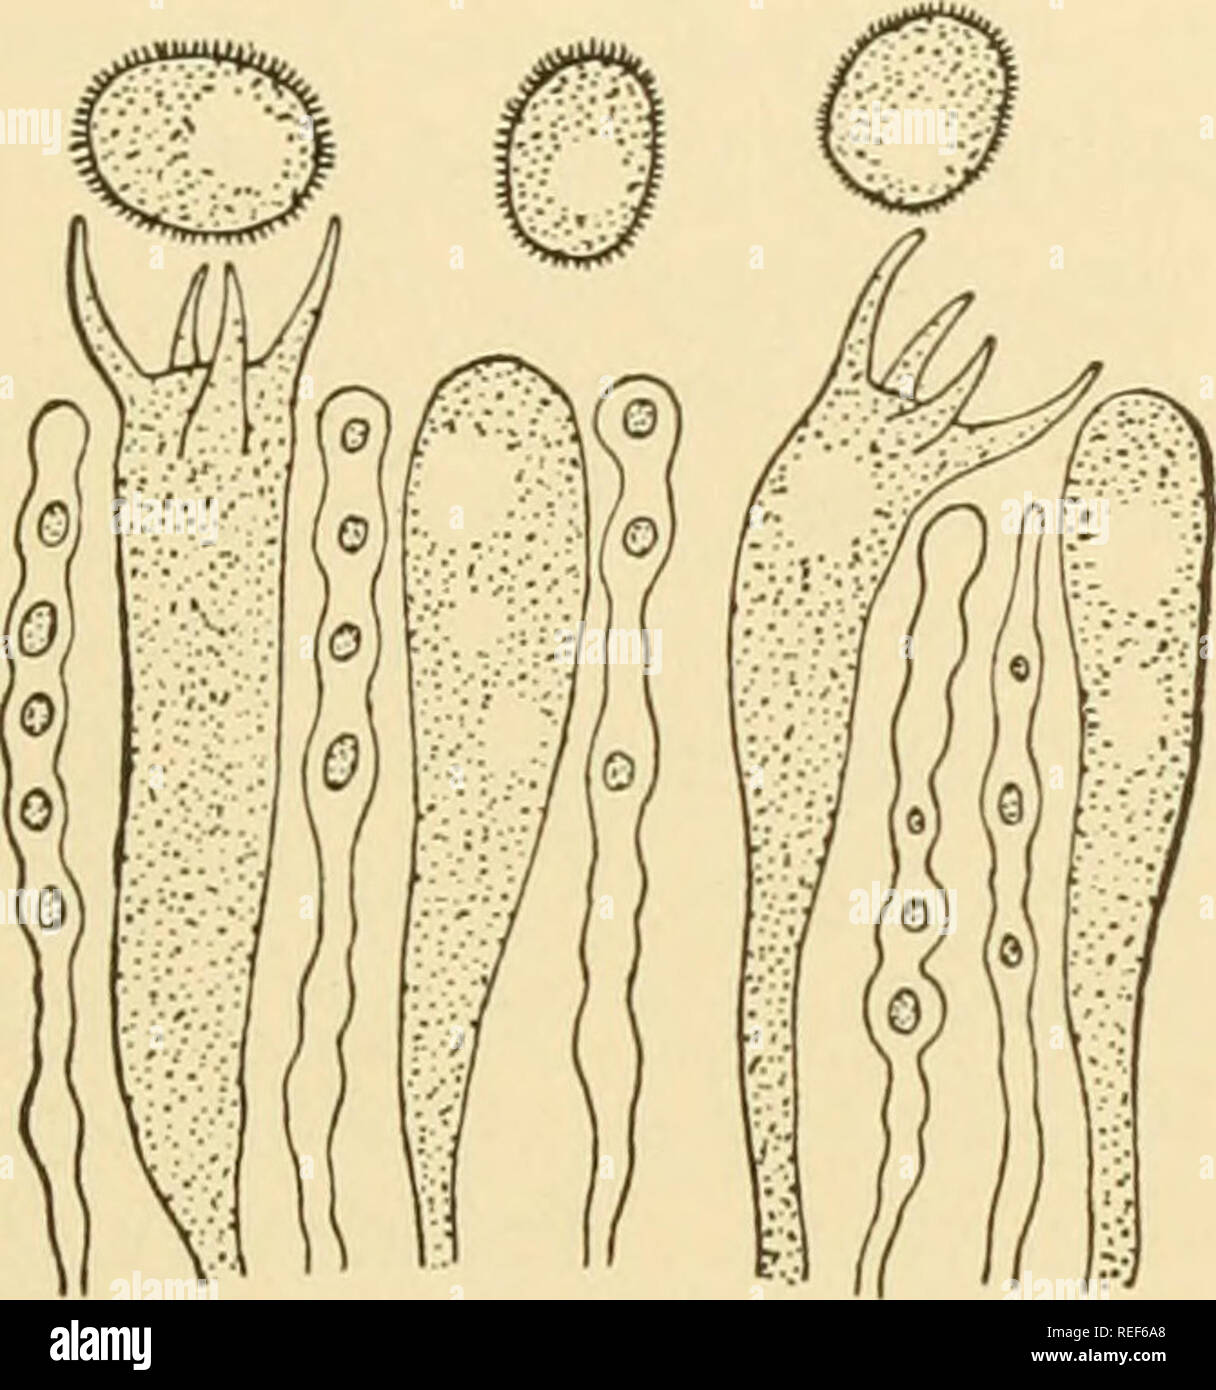 . Comparative morphology of Fungi. Fungi. POLYPORALES 441 ally branched, spines of variable length (dendrophyses Fig. 285, 2). Perhaps they are to be regarded as organs of protection. In addition, gloecystidia have been found in some forms. In the higher genera, as in Cyphella (fructifications membranous), Cytidia (Auricuiariopsis) (fructifications gelatinous), the fructifications are raised from the central point of attachment by a compressed, short stipe; they then assume an infundibuliform or cup shape, whose inner side is corrugated and bears the hymenium. In Solenia, finally, the hyponast Stock Photo